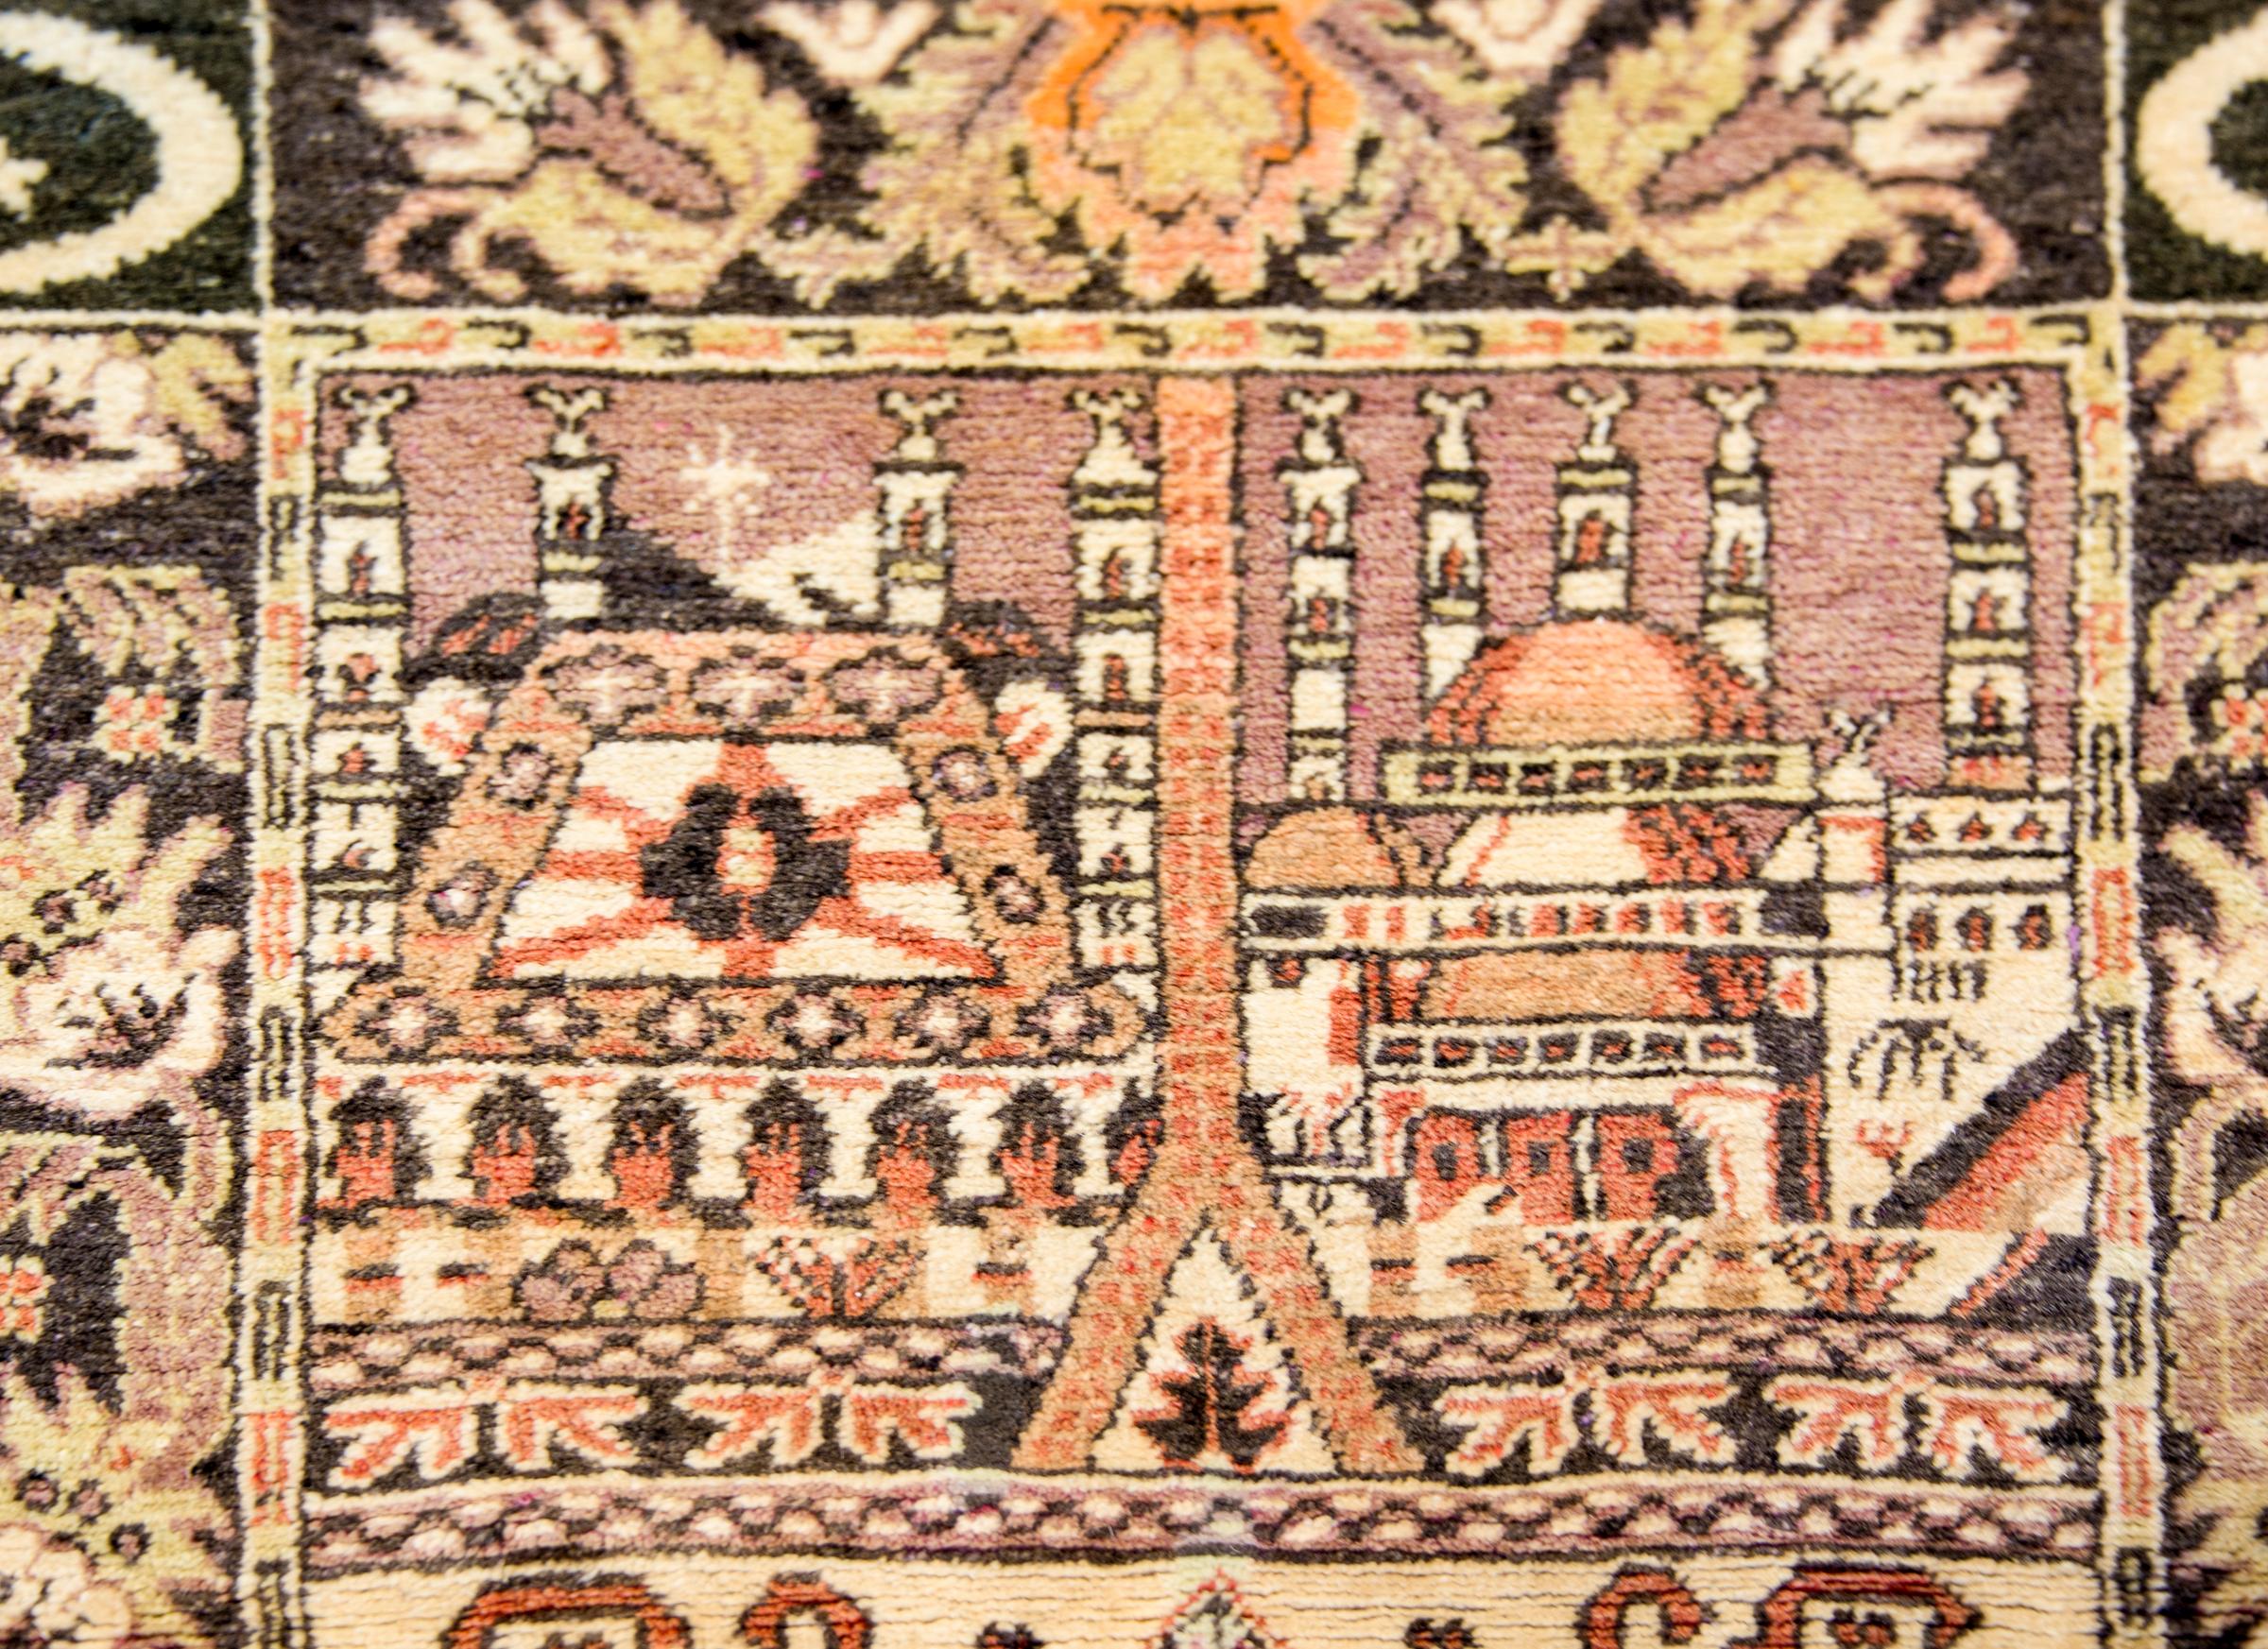 A rare and amazing mid-20th century Central Asian Samarghand pictorial prayer rug with two distinct scenes. The top shows the exterior of a mosque beautifully rendered in soft orange, purple, gold, and cream colored wool. The bottom scene depicts